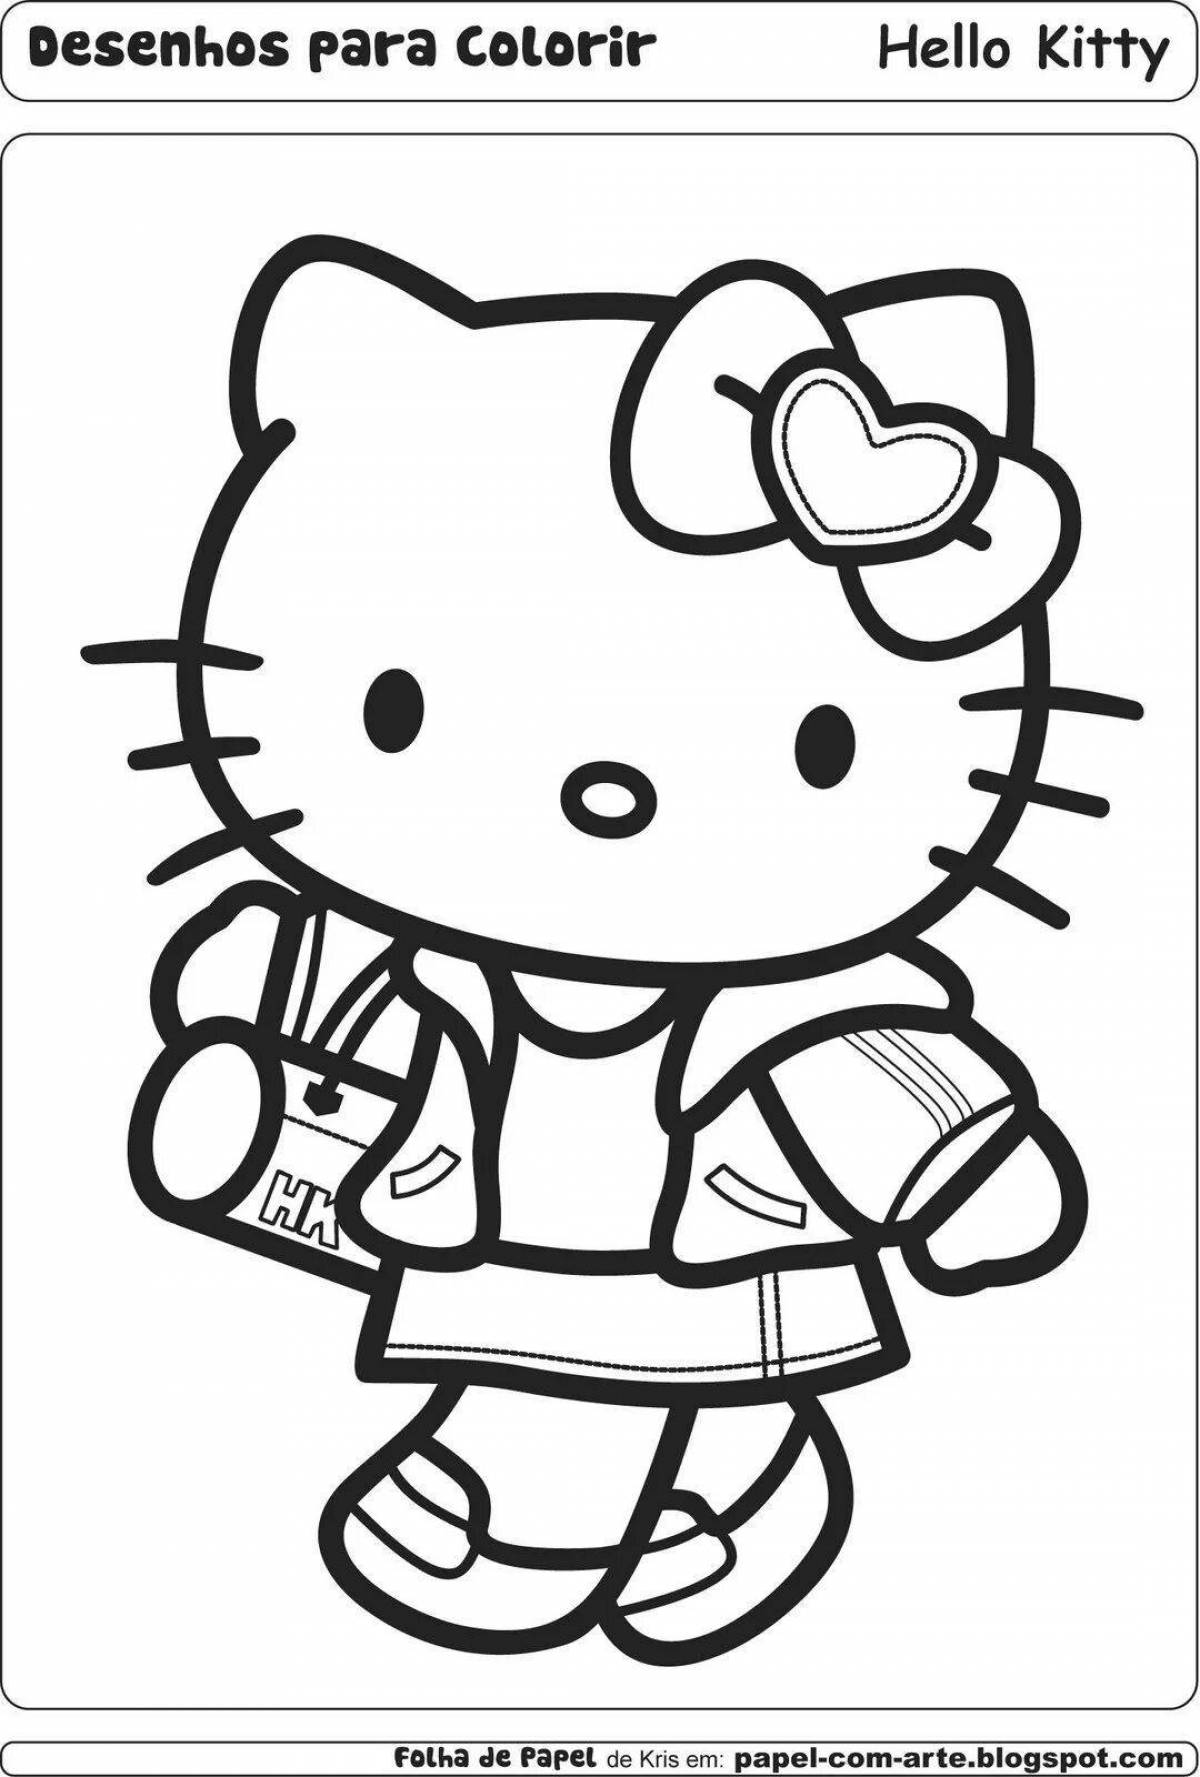 Playful hello kitty anime coloring page